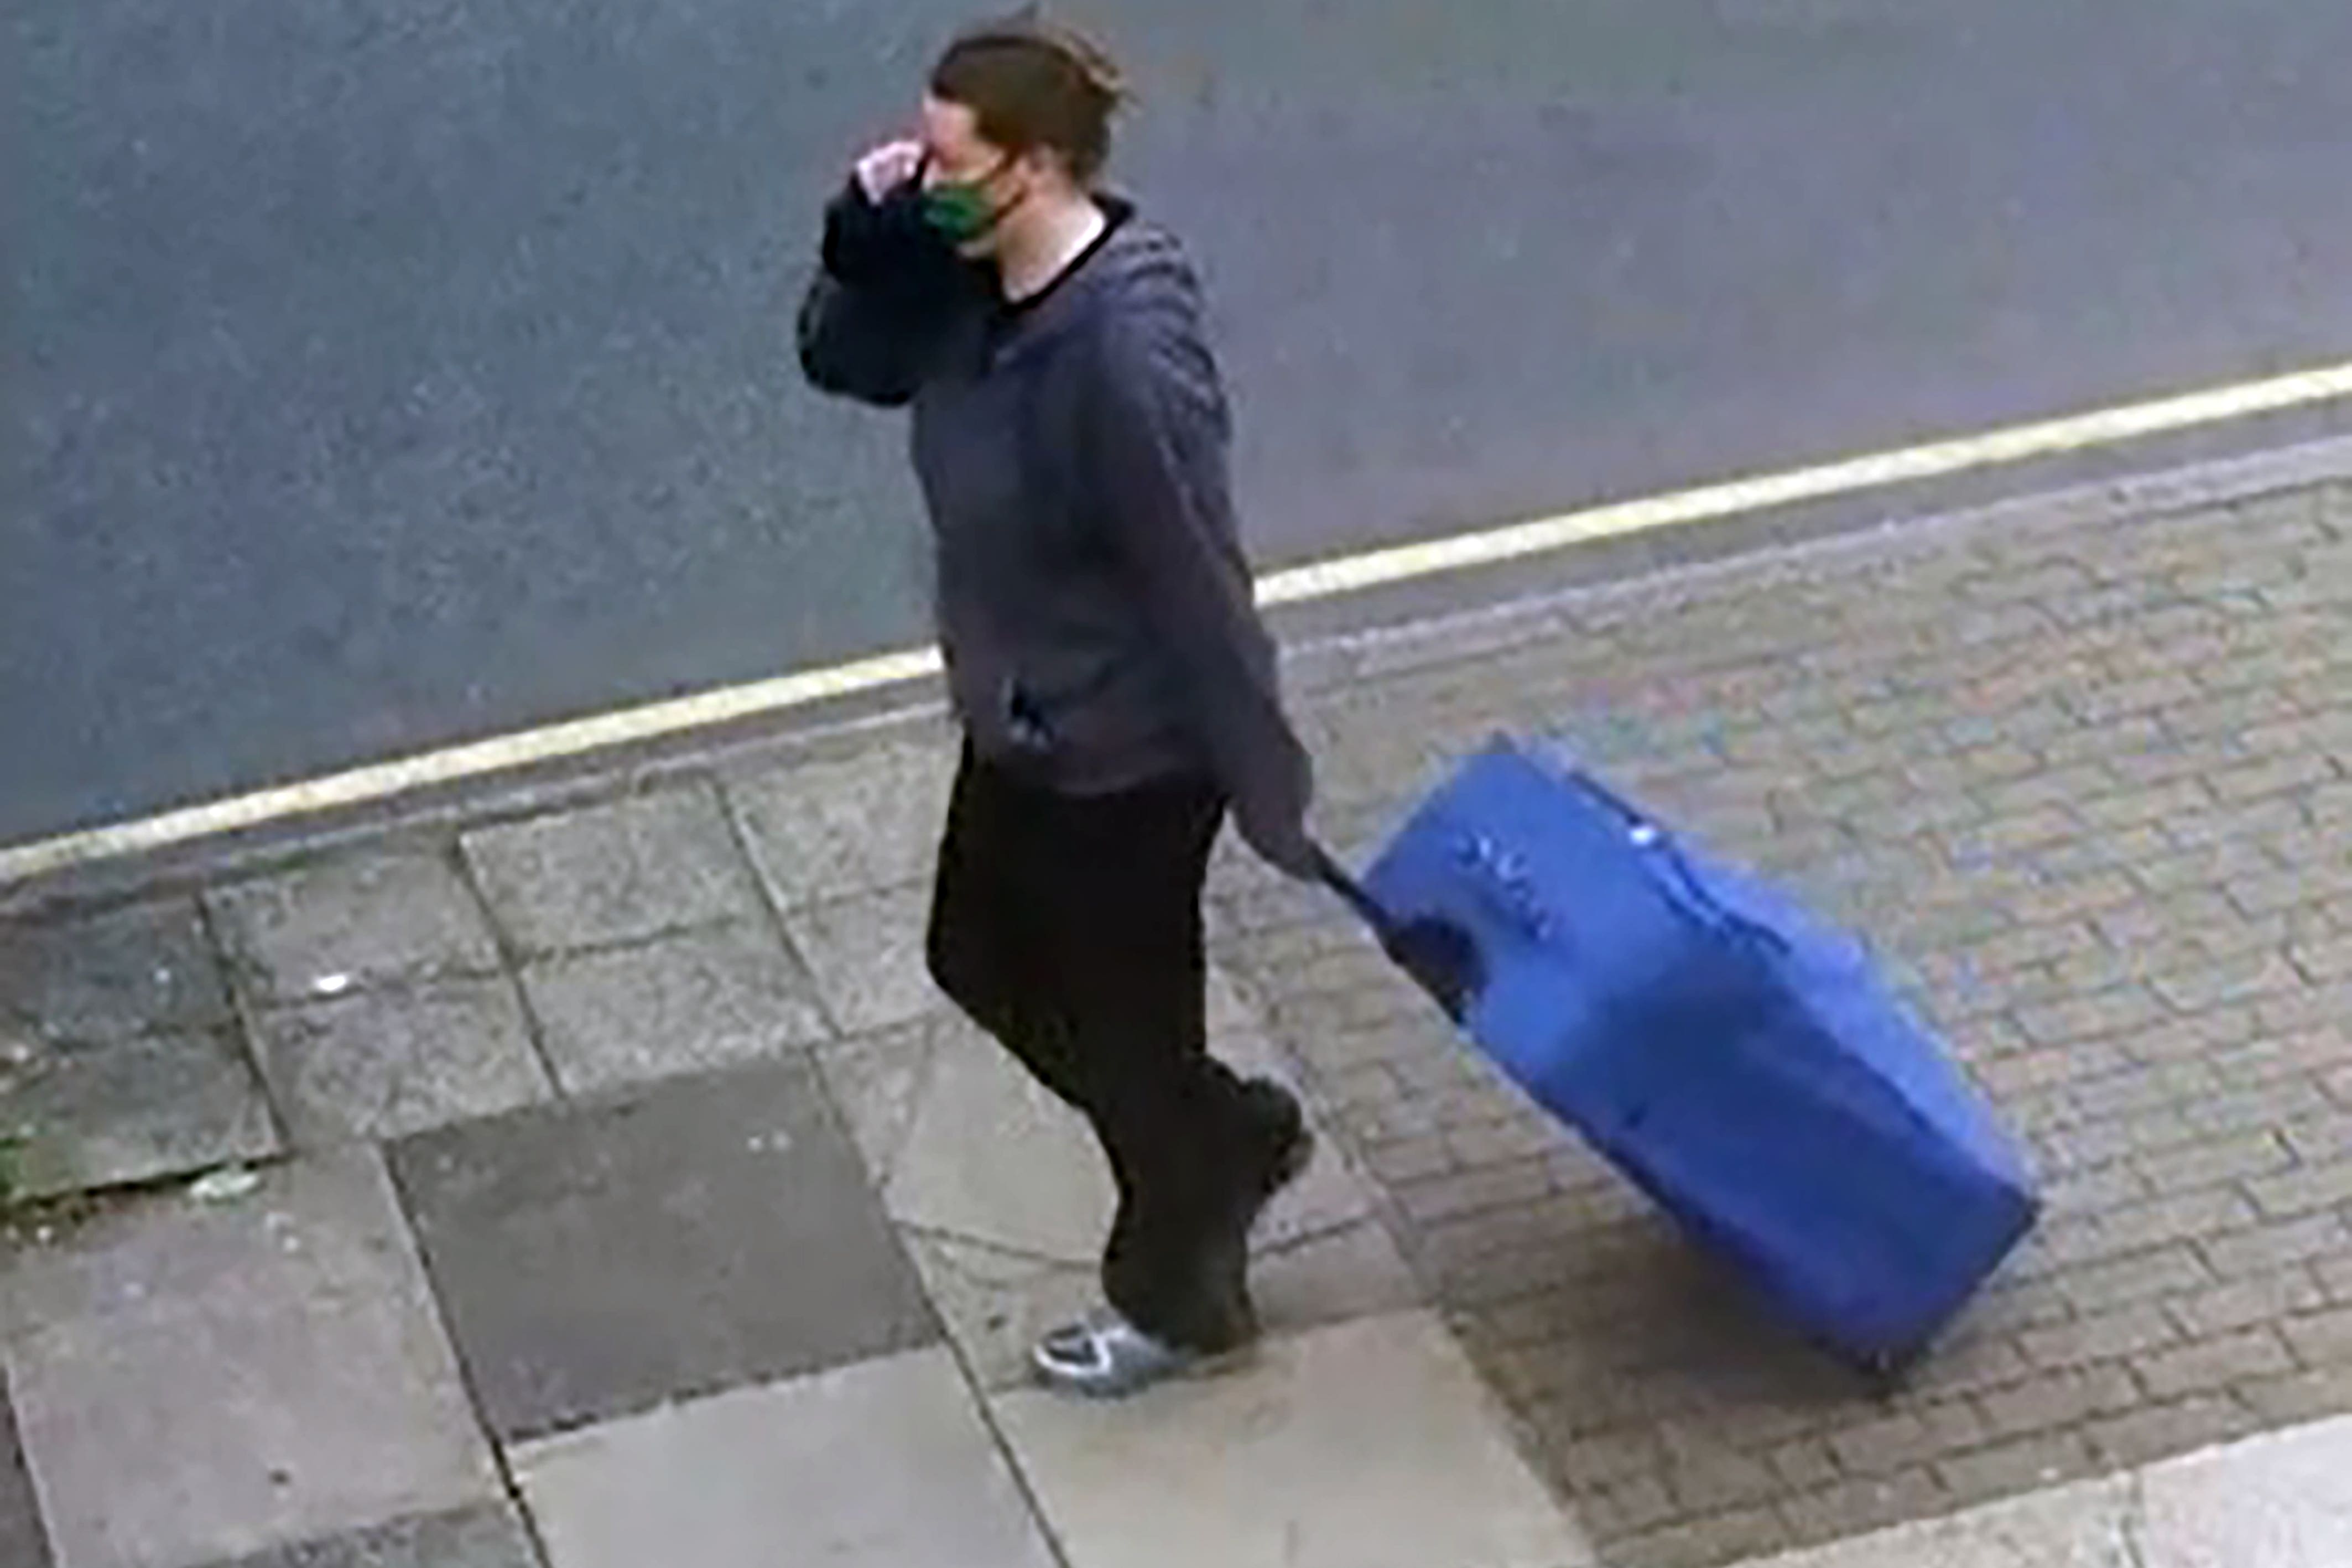 A CCTV image of Jemma Mitchell dragging a blue suitcase in northwest London on 11 June 2021 (Metropolitan Police/PA)